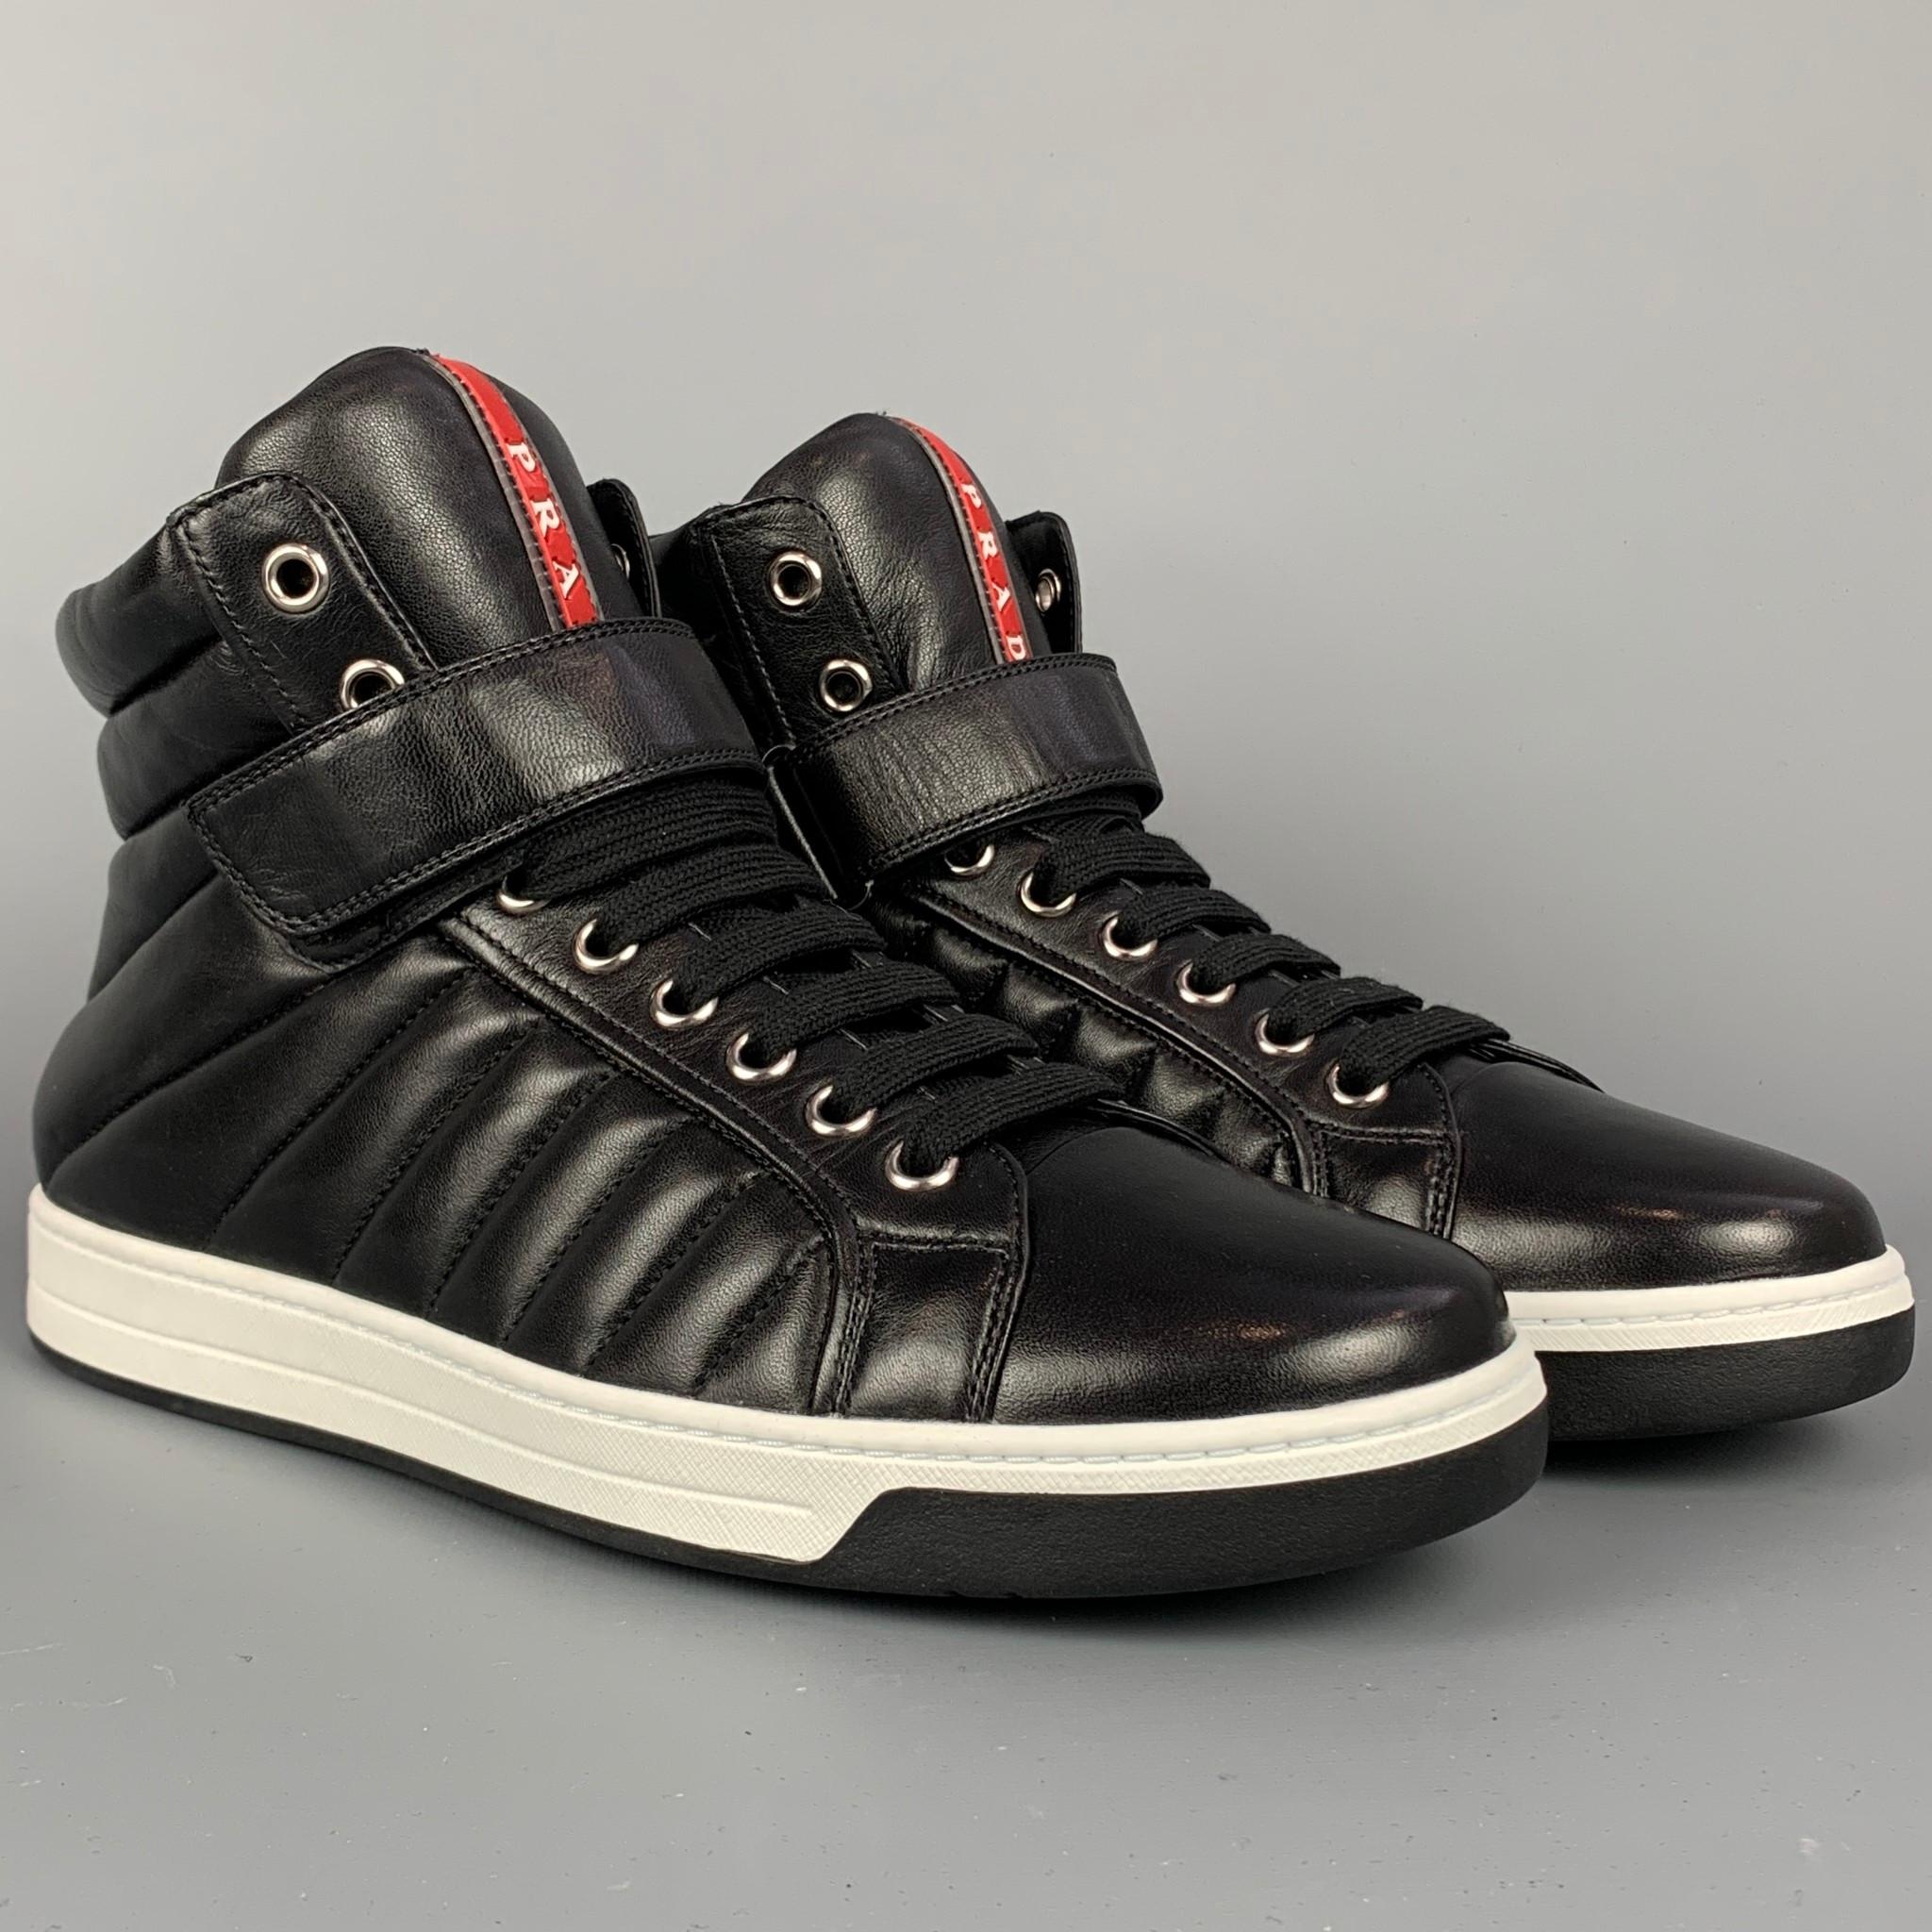 PRADA sneakers comes in a black quilted leather featuring a high top style, front strap, side zipper, rubber sole, and a lace up closure. 

New With Box. 
Marked: 4T 2726 9.5

Outsole: 4 in. x 11.5 in.